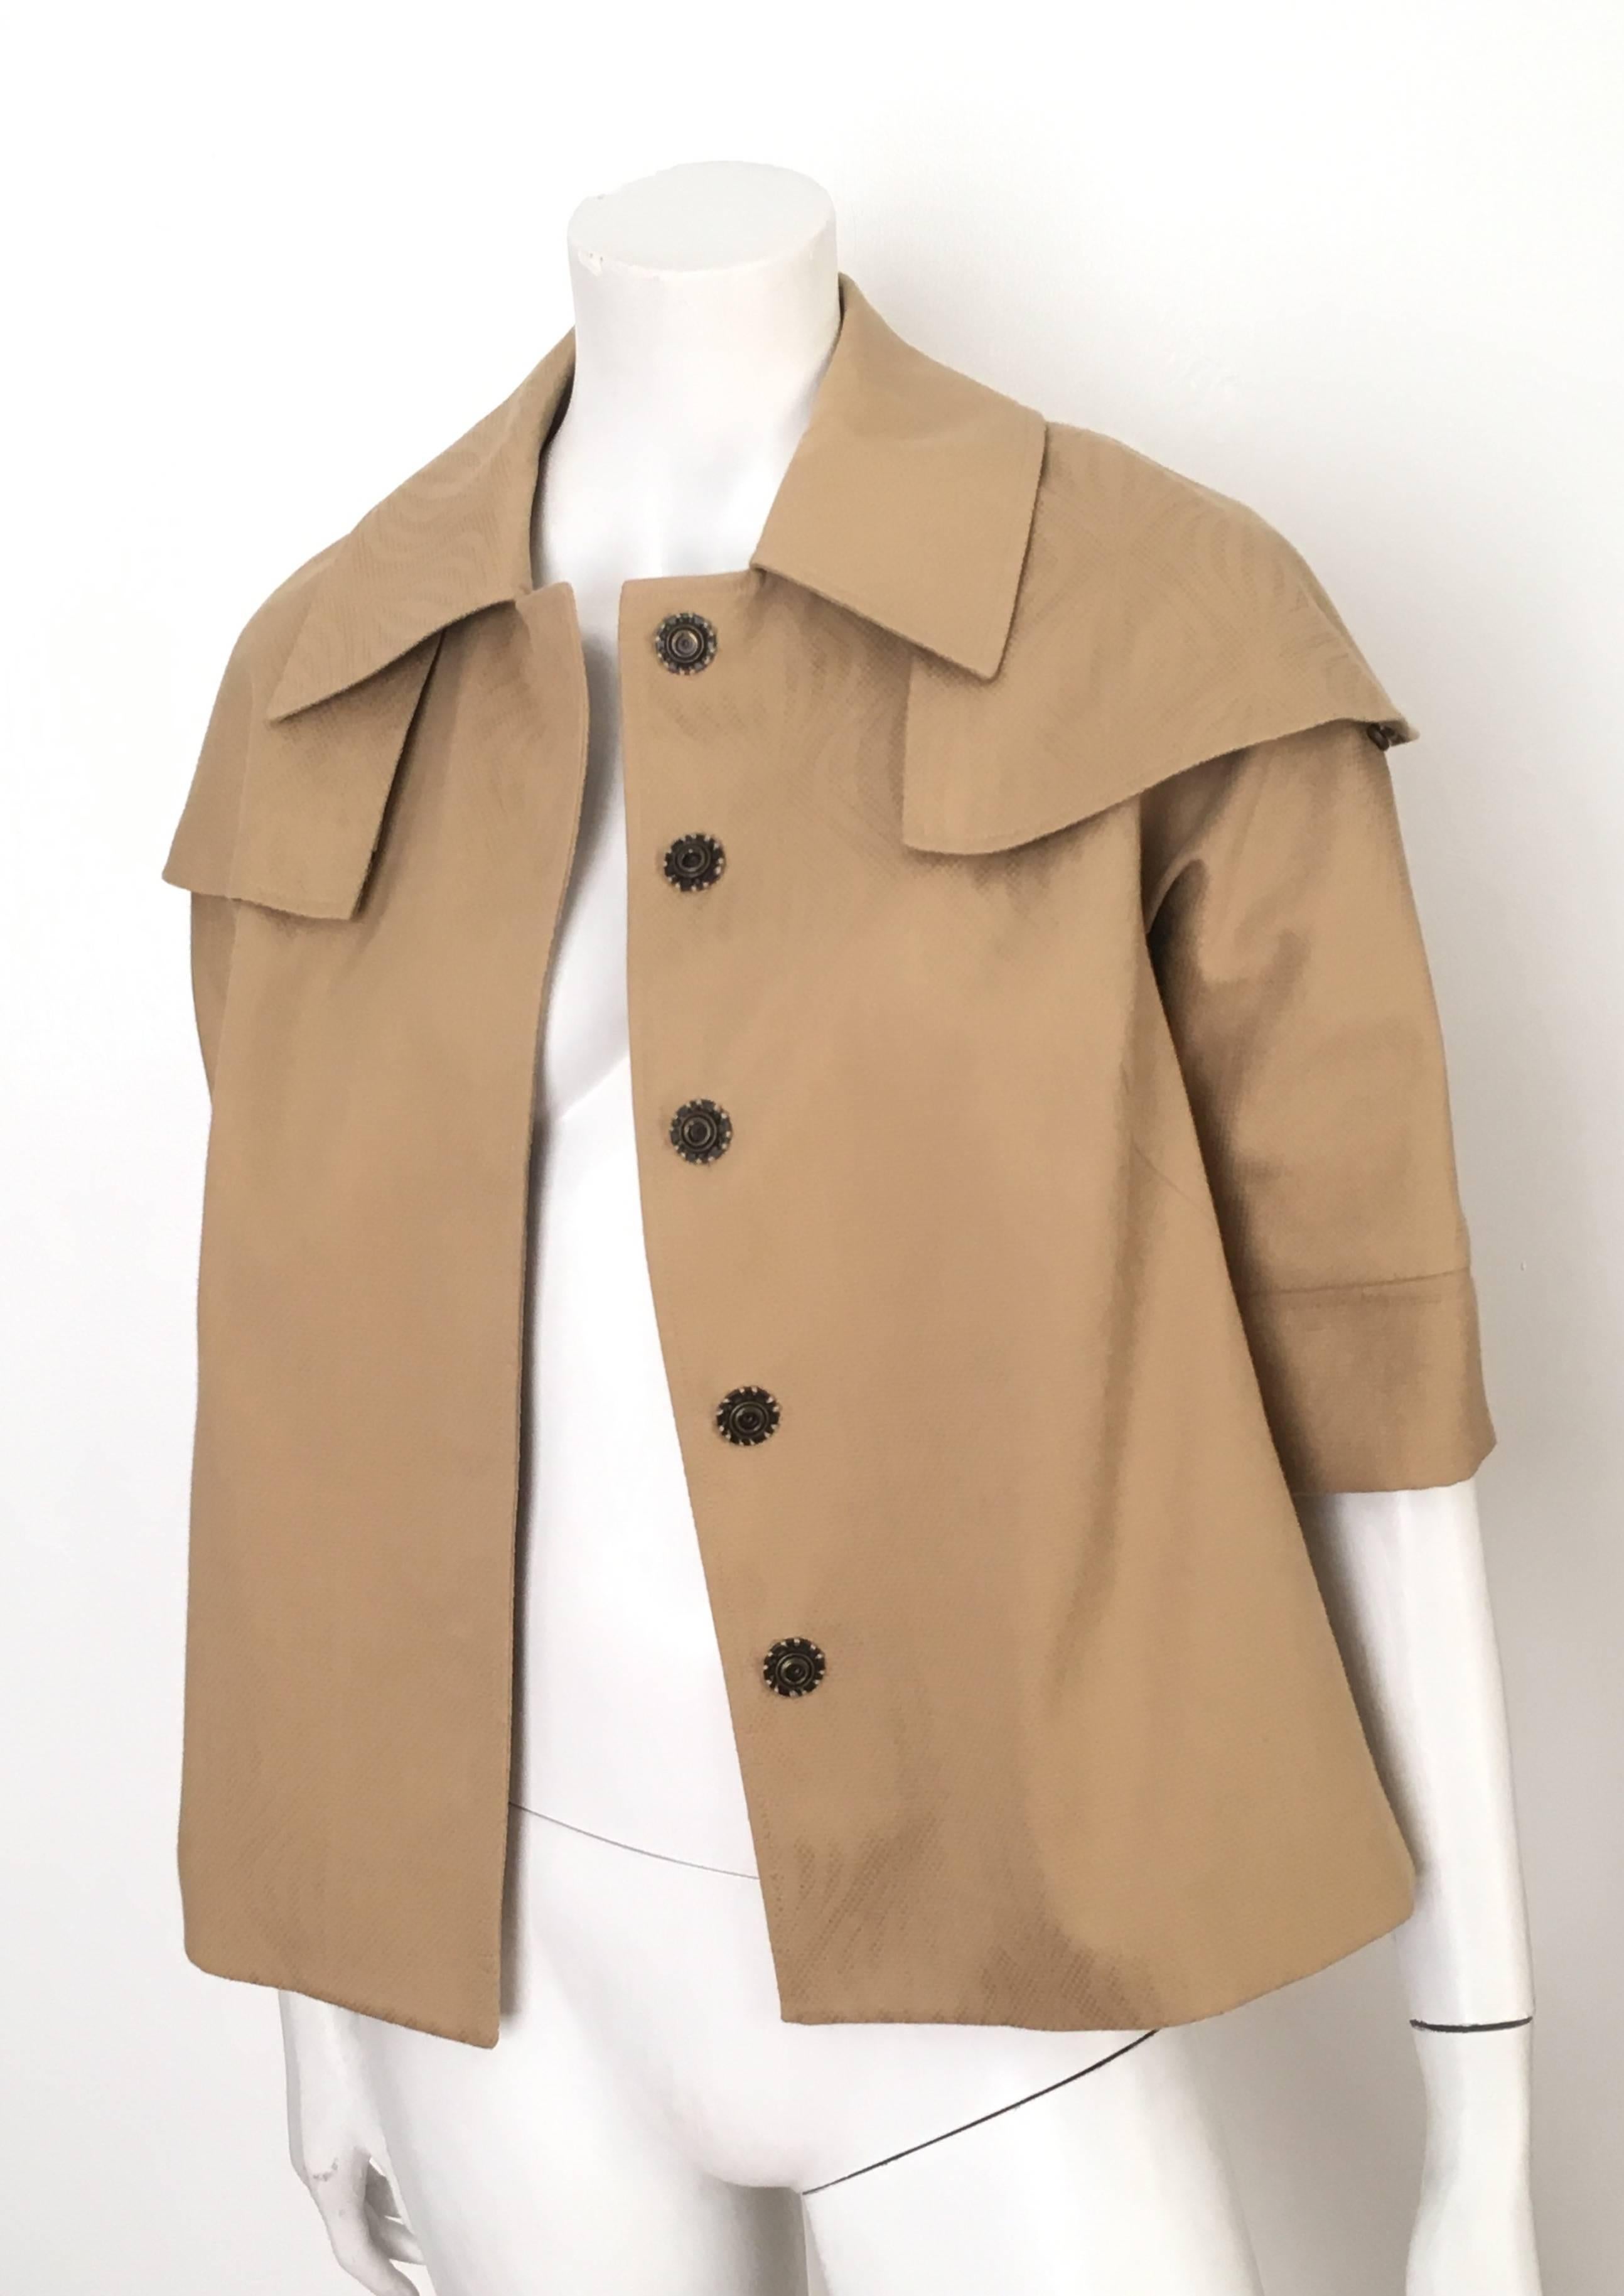 Lela Rose Tan Caped Swing Jacket Size 4. Never Worn. For Sale 2